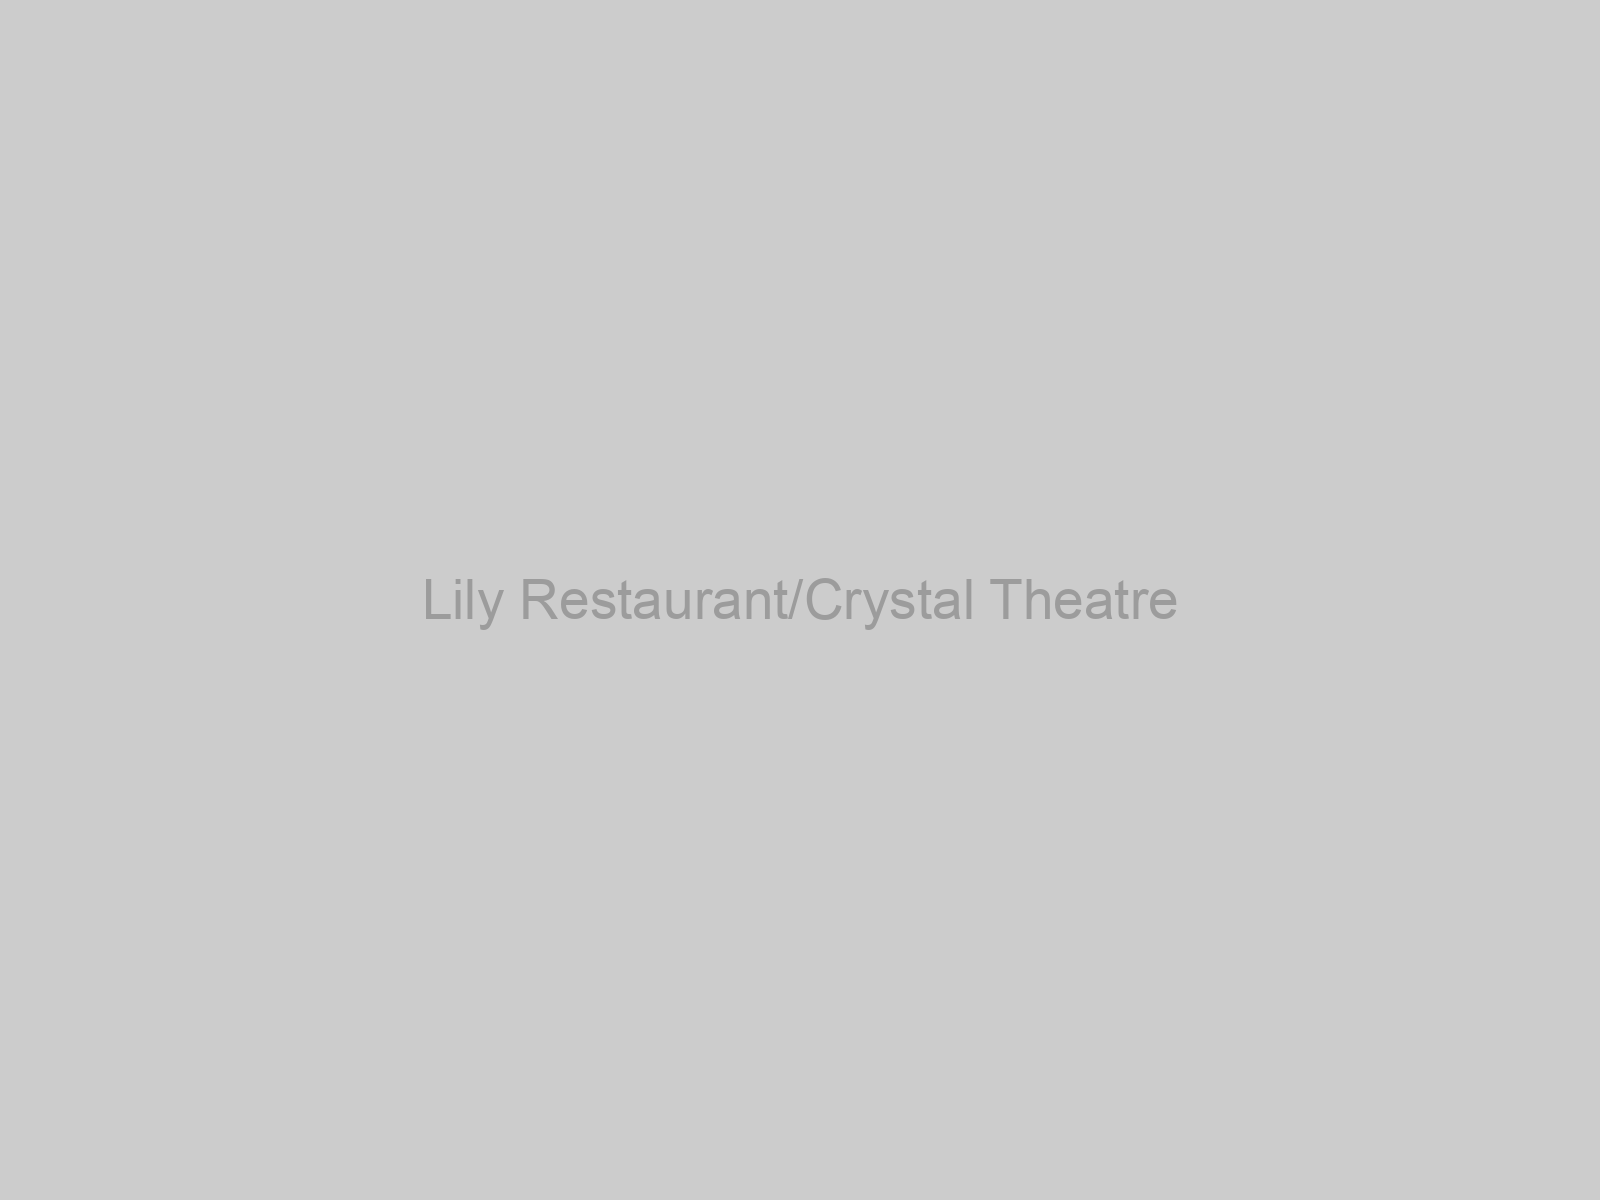 Lily Restaurant/Crystal Theatre